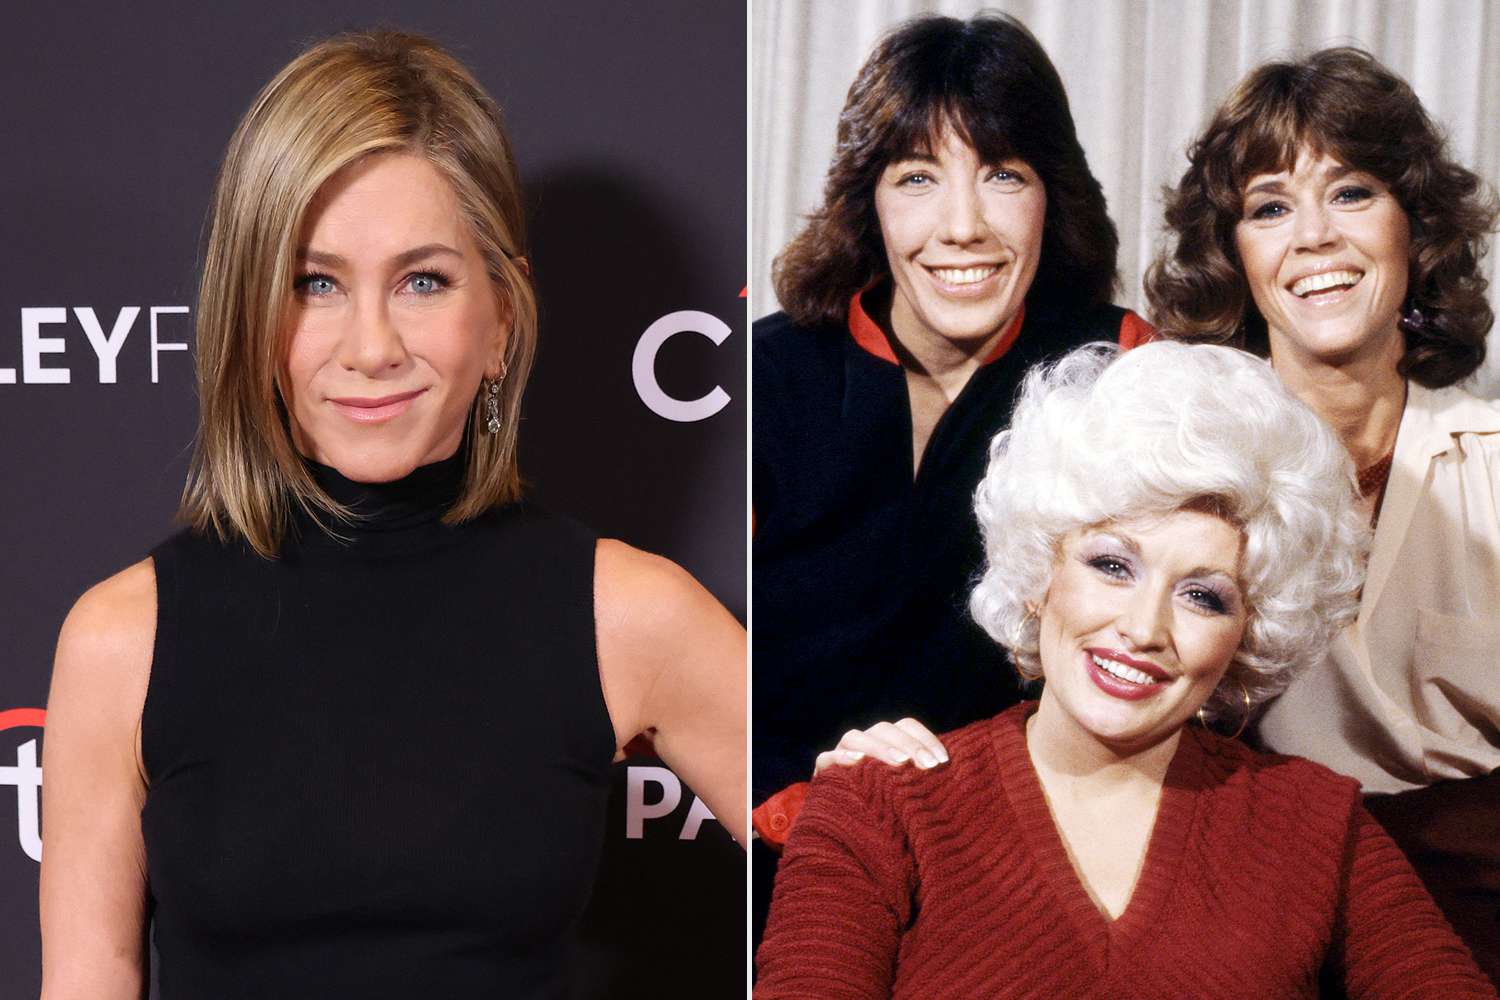 Jennifer Aniston to Produce “9 to 5” Reimagining with a Script from “Juno” Writer Diablo Cody